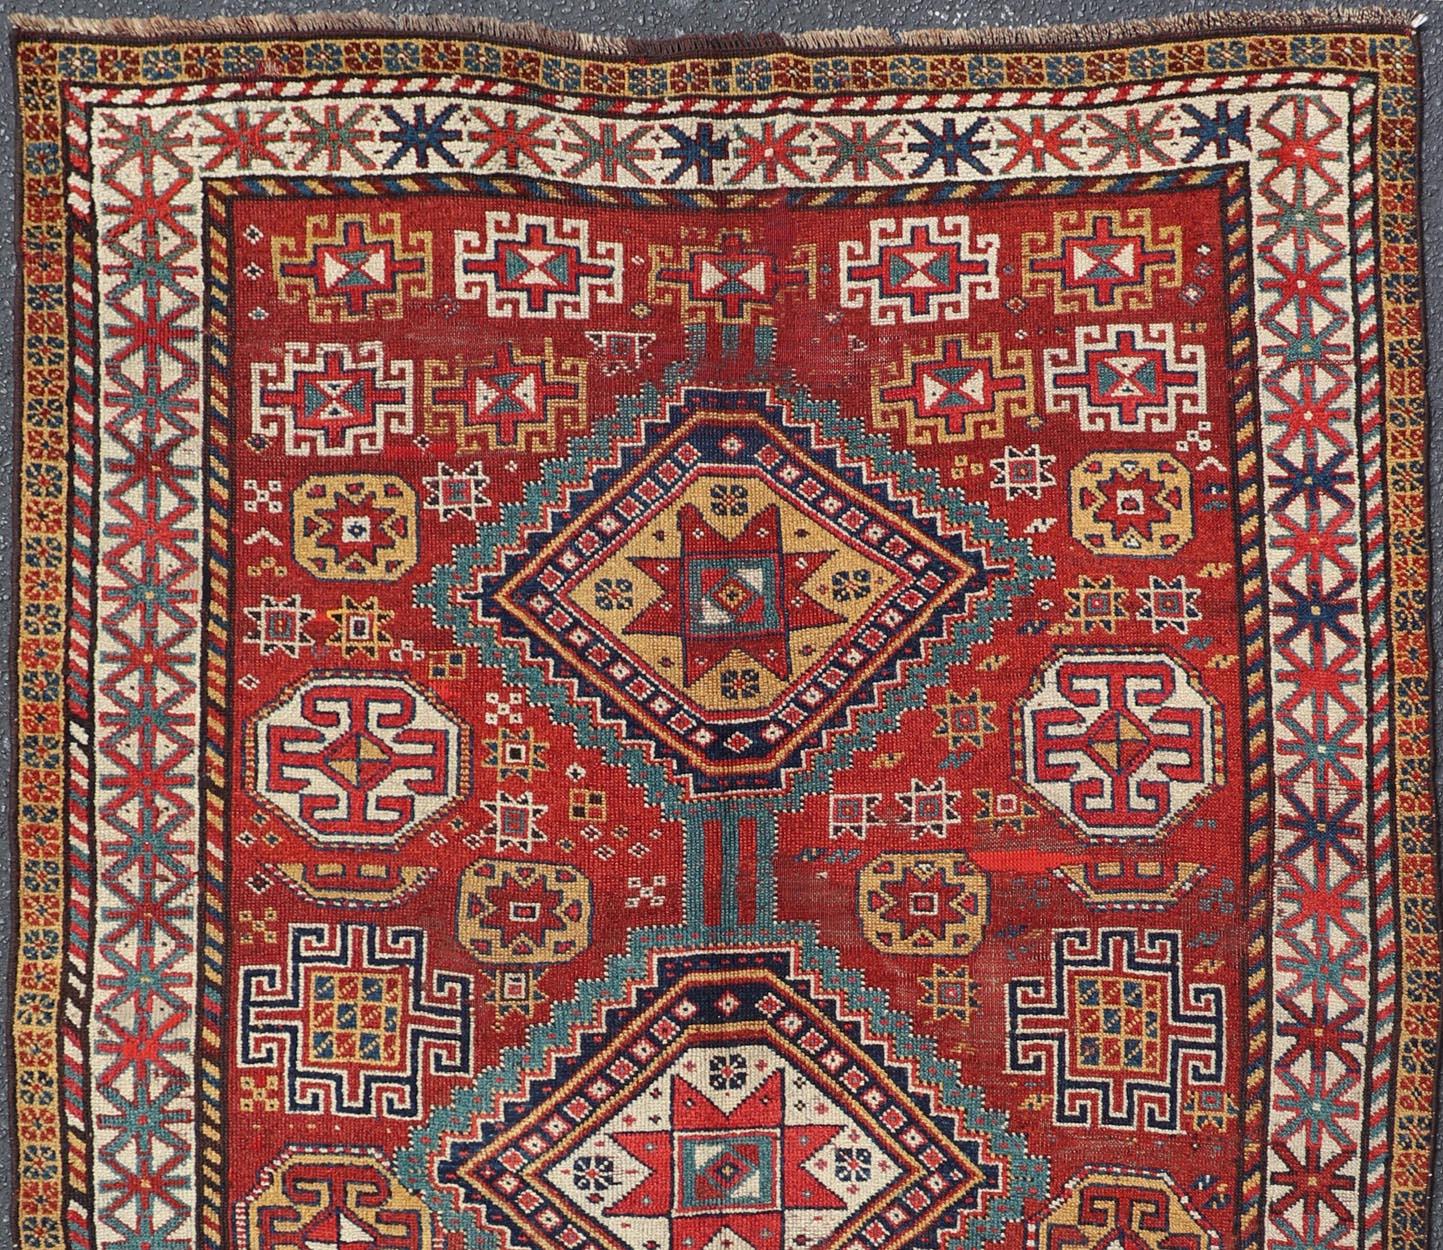 Unique antique Qashqai rug with geometric motifs in red, blue, and golden yellow, rug #S12-0518. 
 This stunning 19th century Qashqai rug from the central region of Persia displays three magnificent, geometric central medallions and an all-over